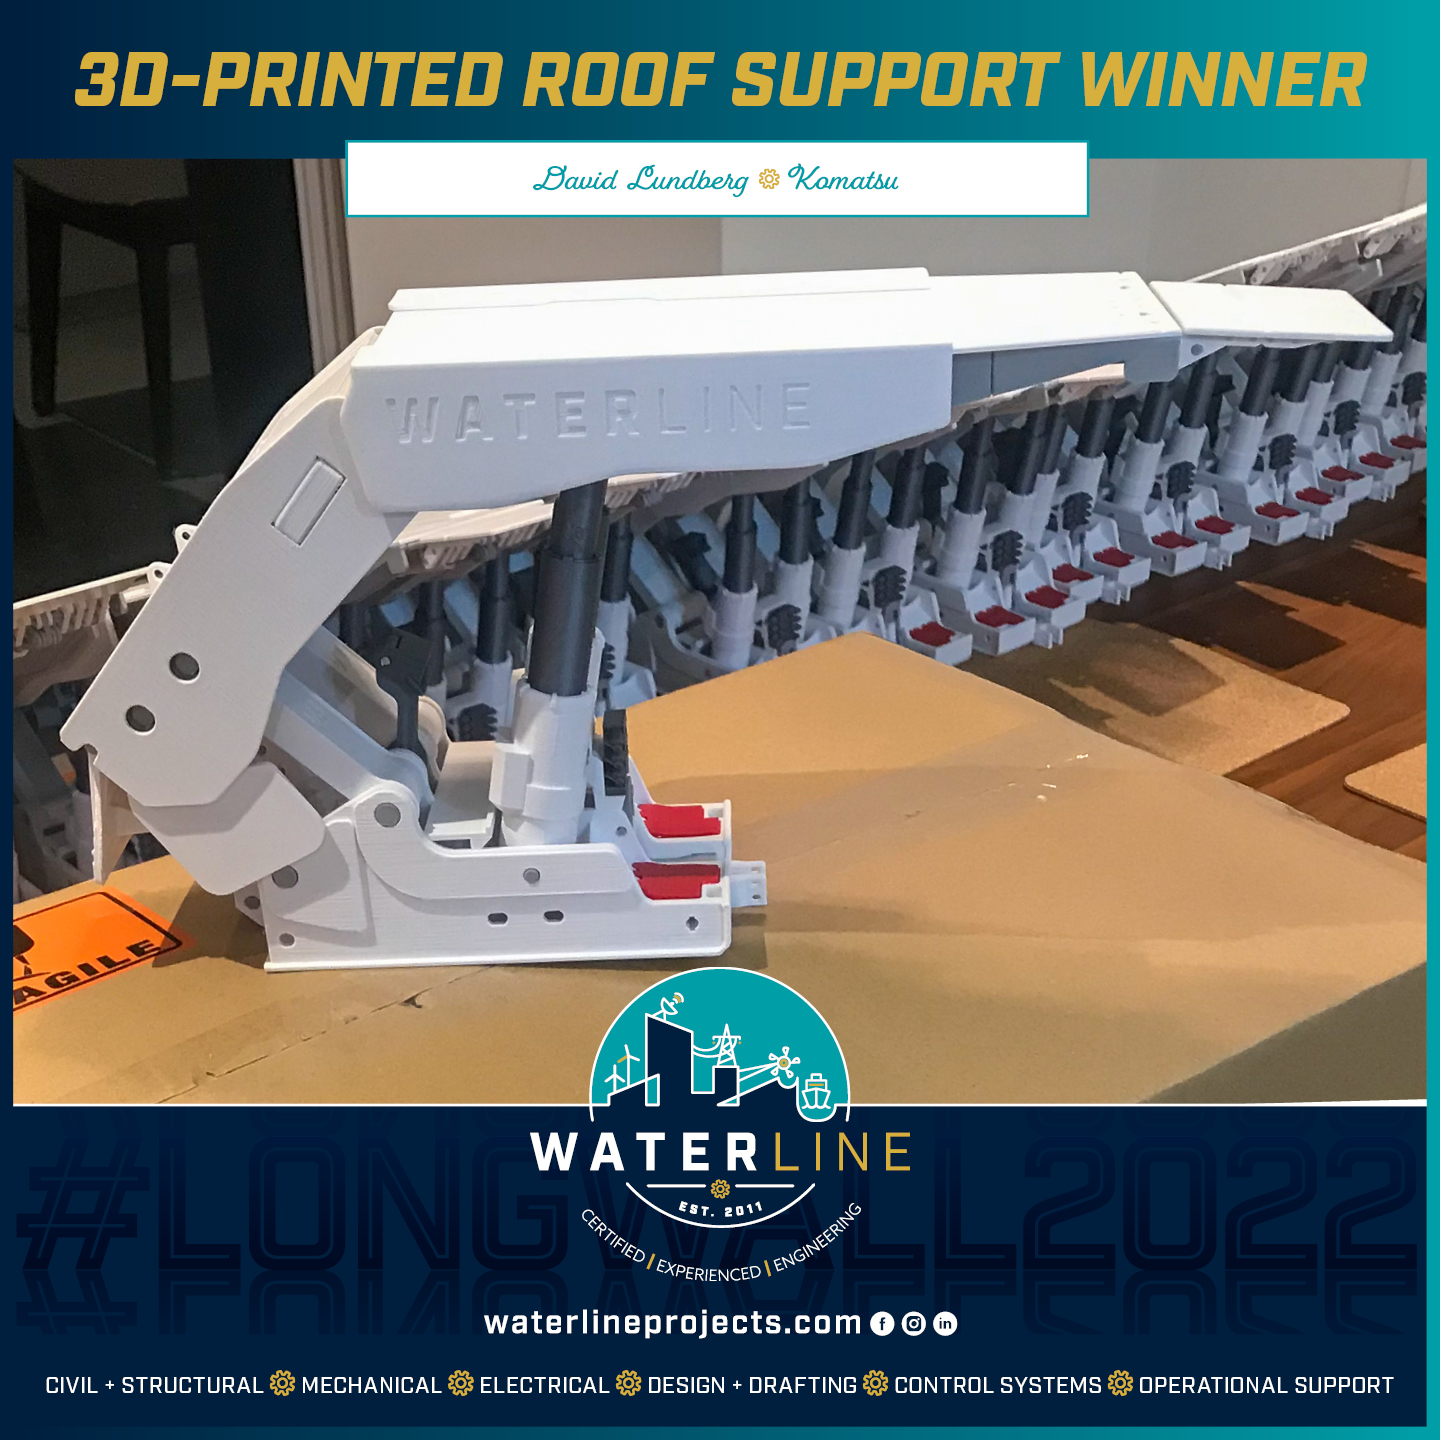 David Lundberg of Komatsu was another lucky winner of one our 3D-printed roofs supports